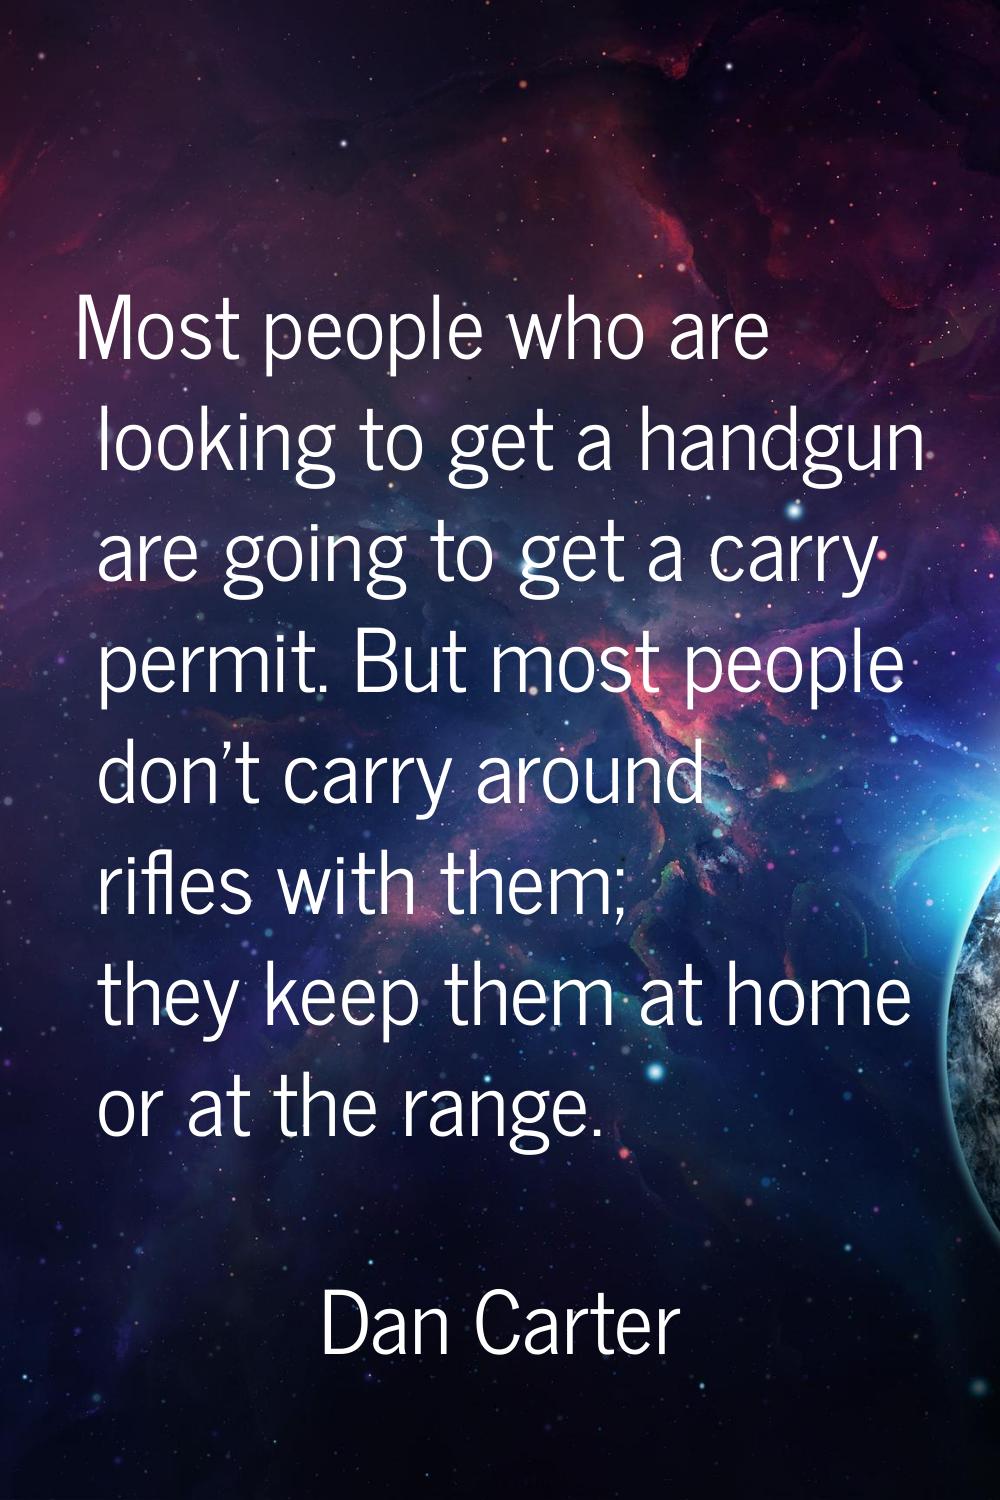 Most people who are looking to get a handgun are going to get a carry permit. But most people don't